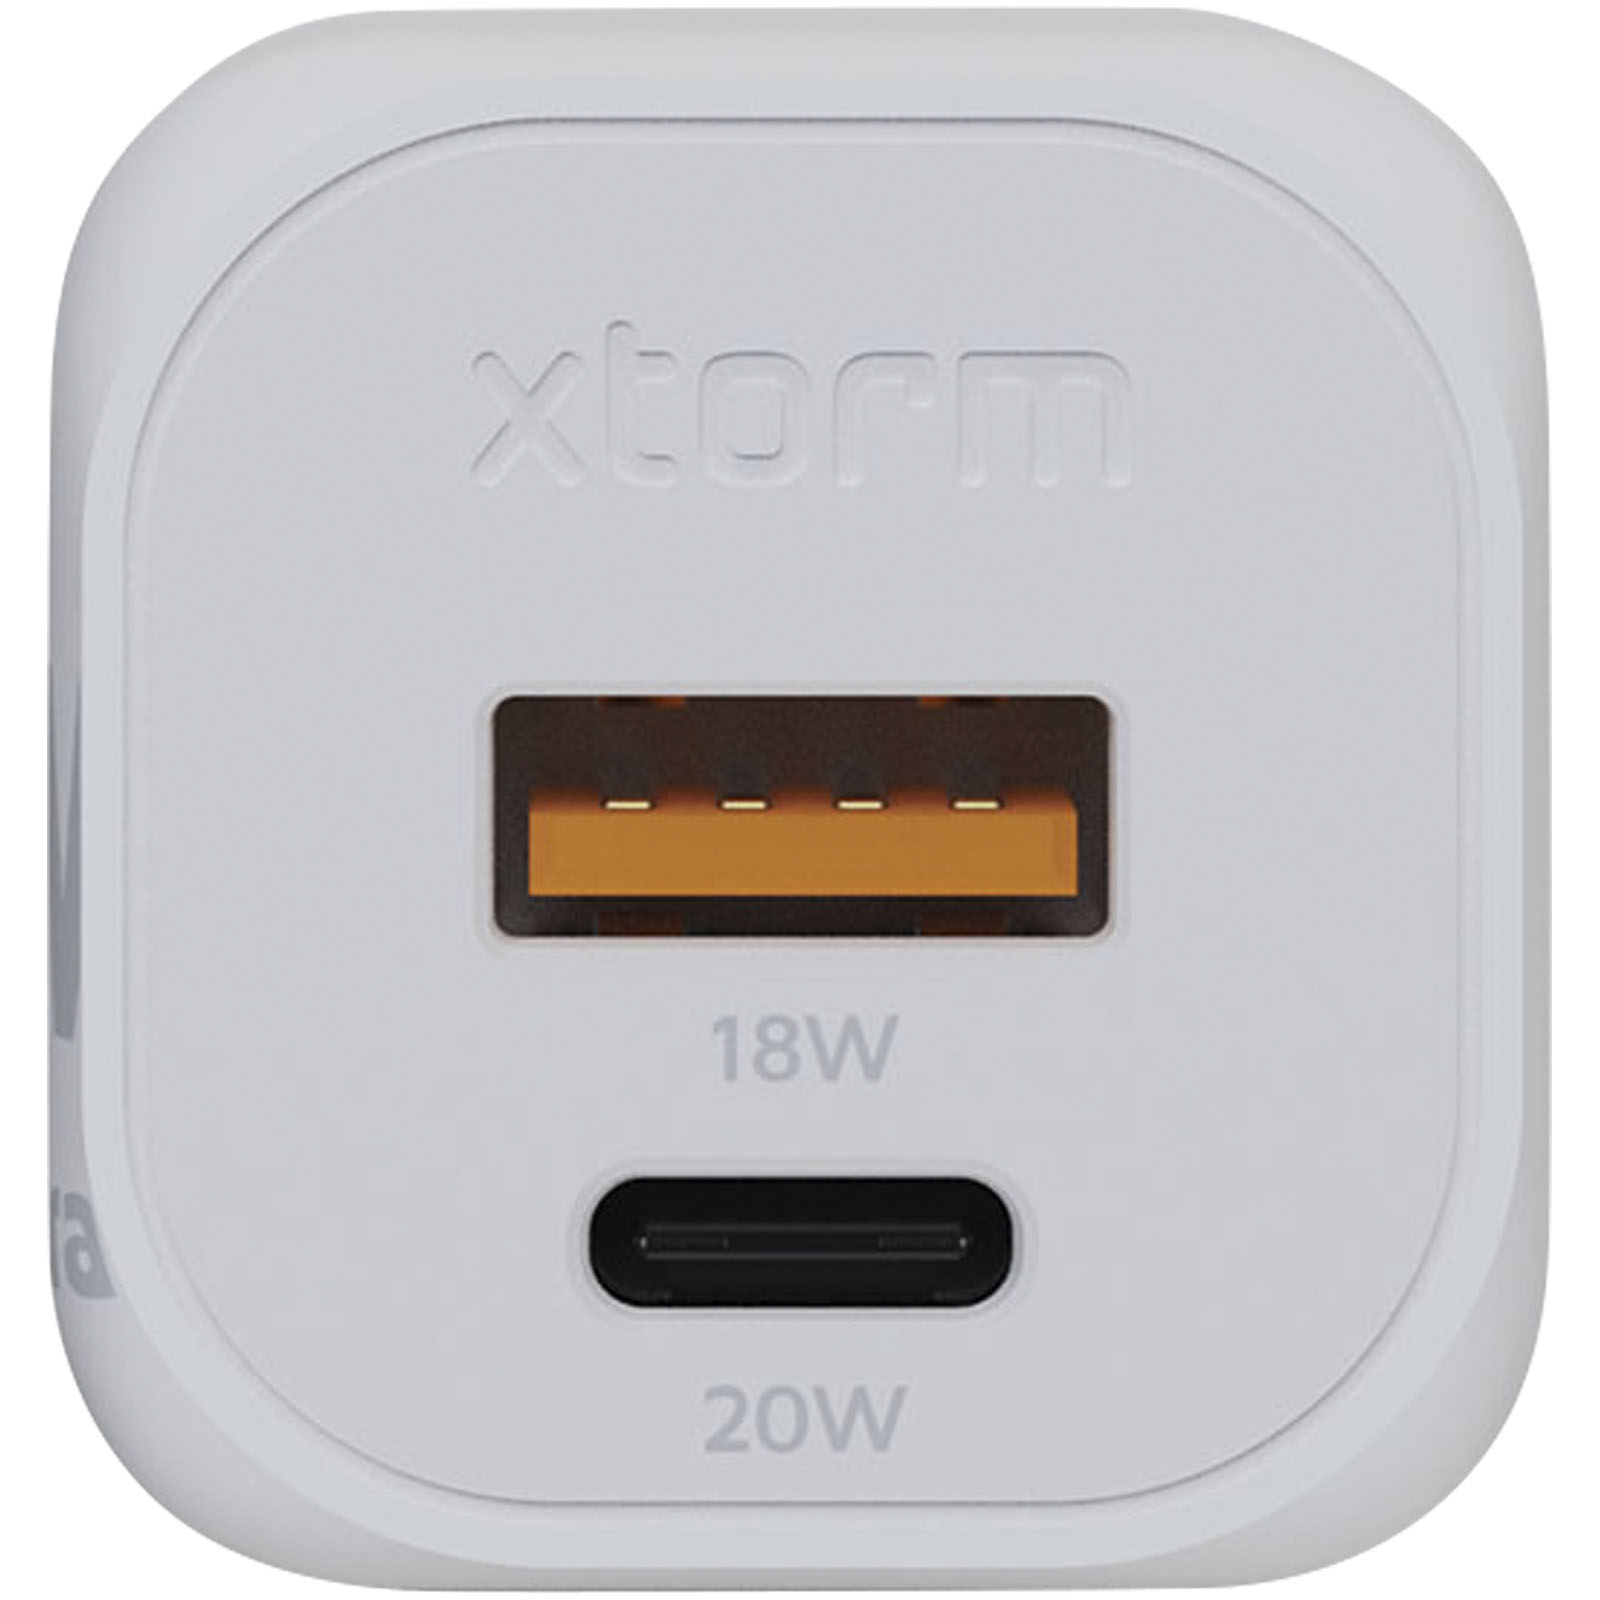 Advertising Chargers - Xtorm XEC020 GaN² Ultra 20W wall charger - 2